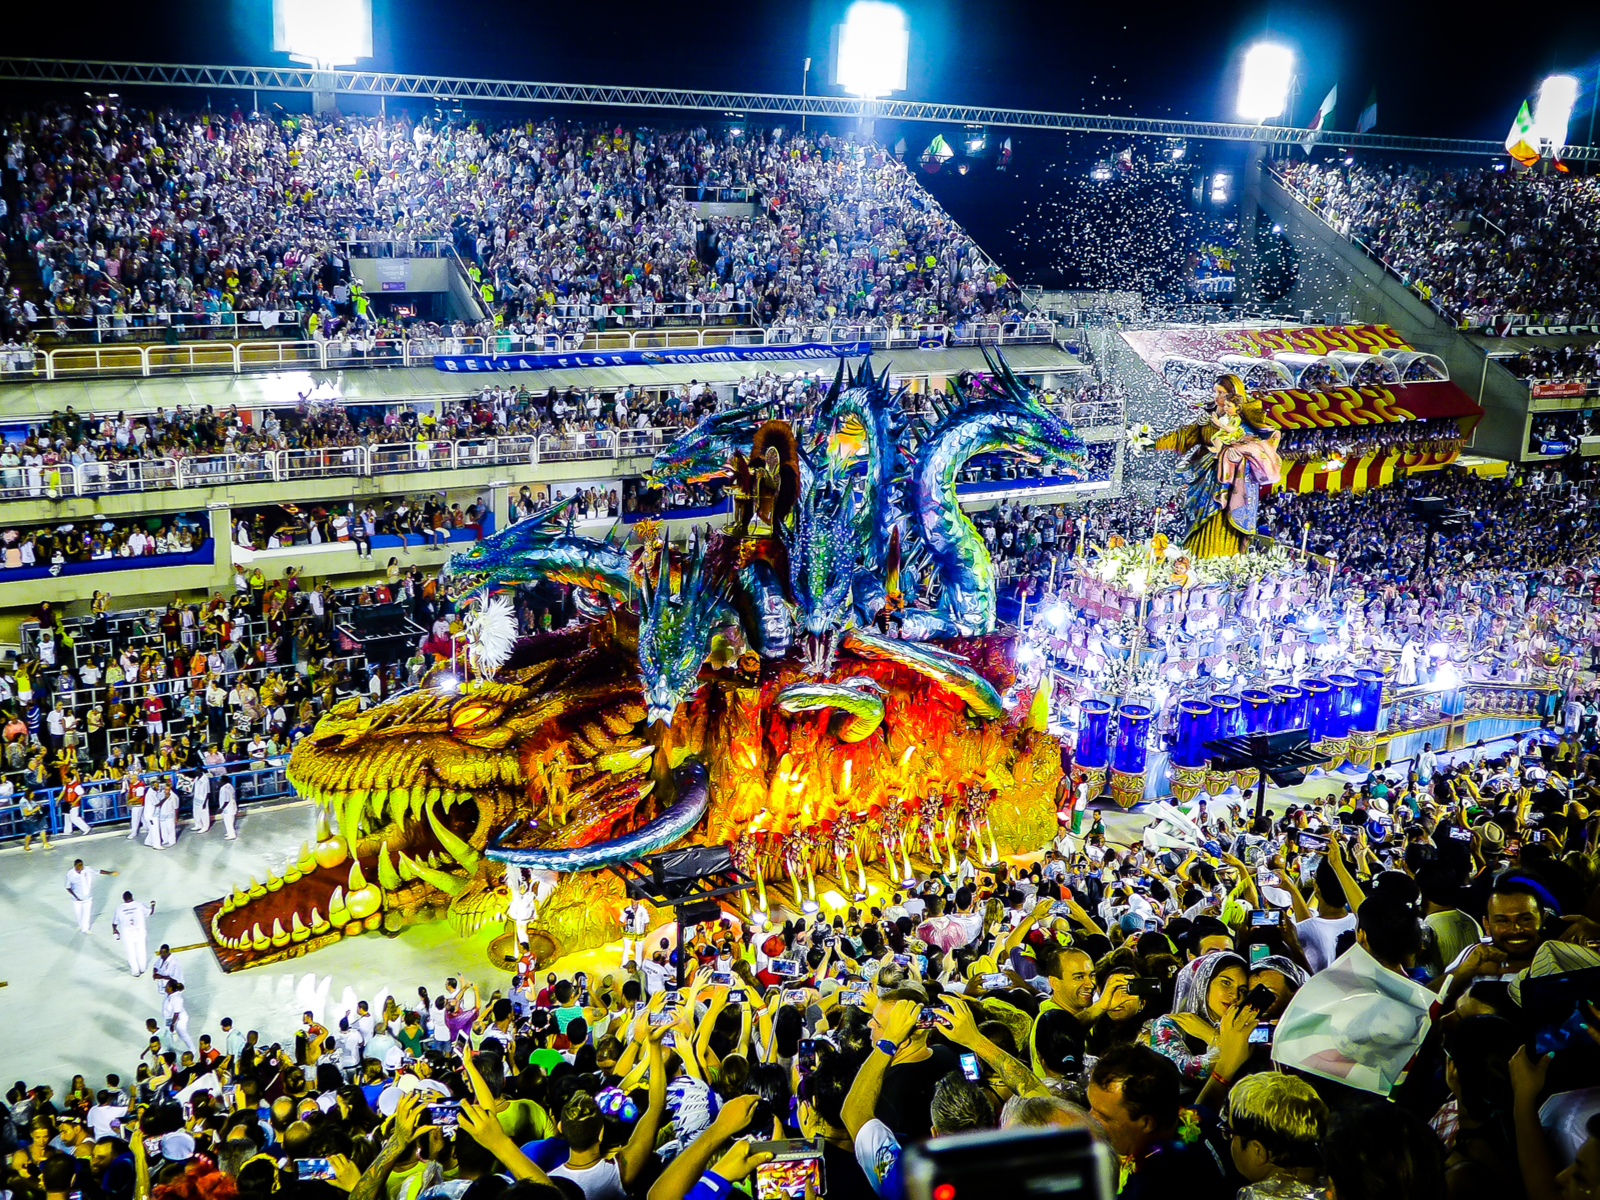 Carnival in Rio during the best time to visit Brazil with lots of parade costumes and floats